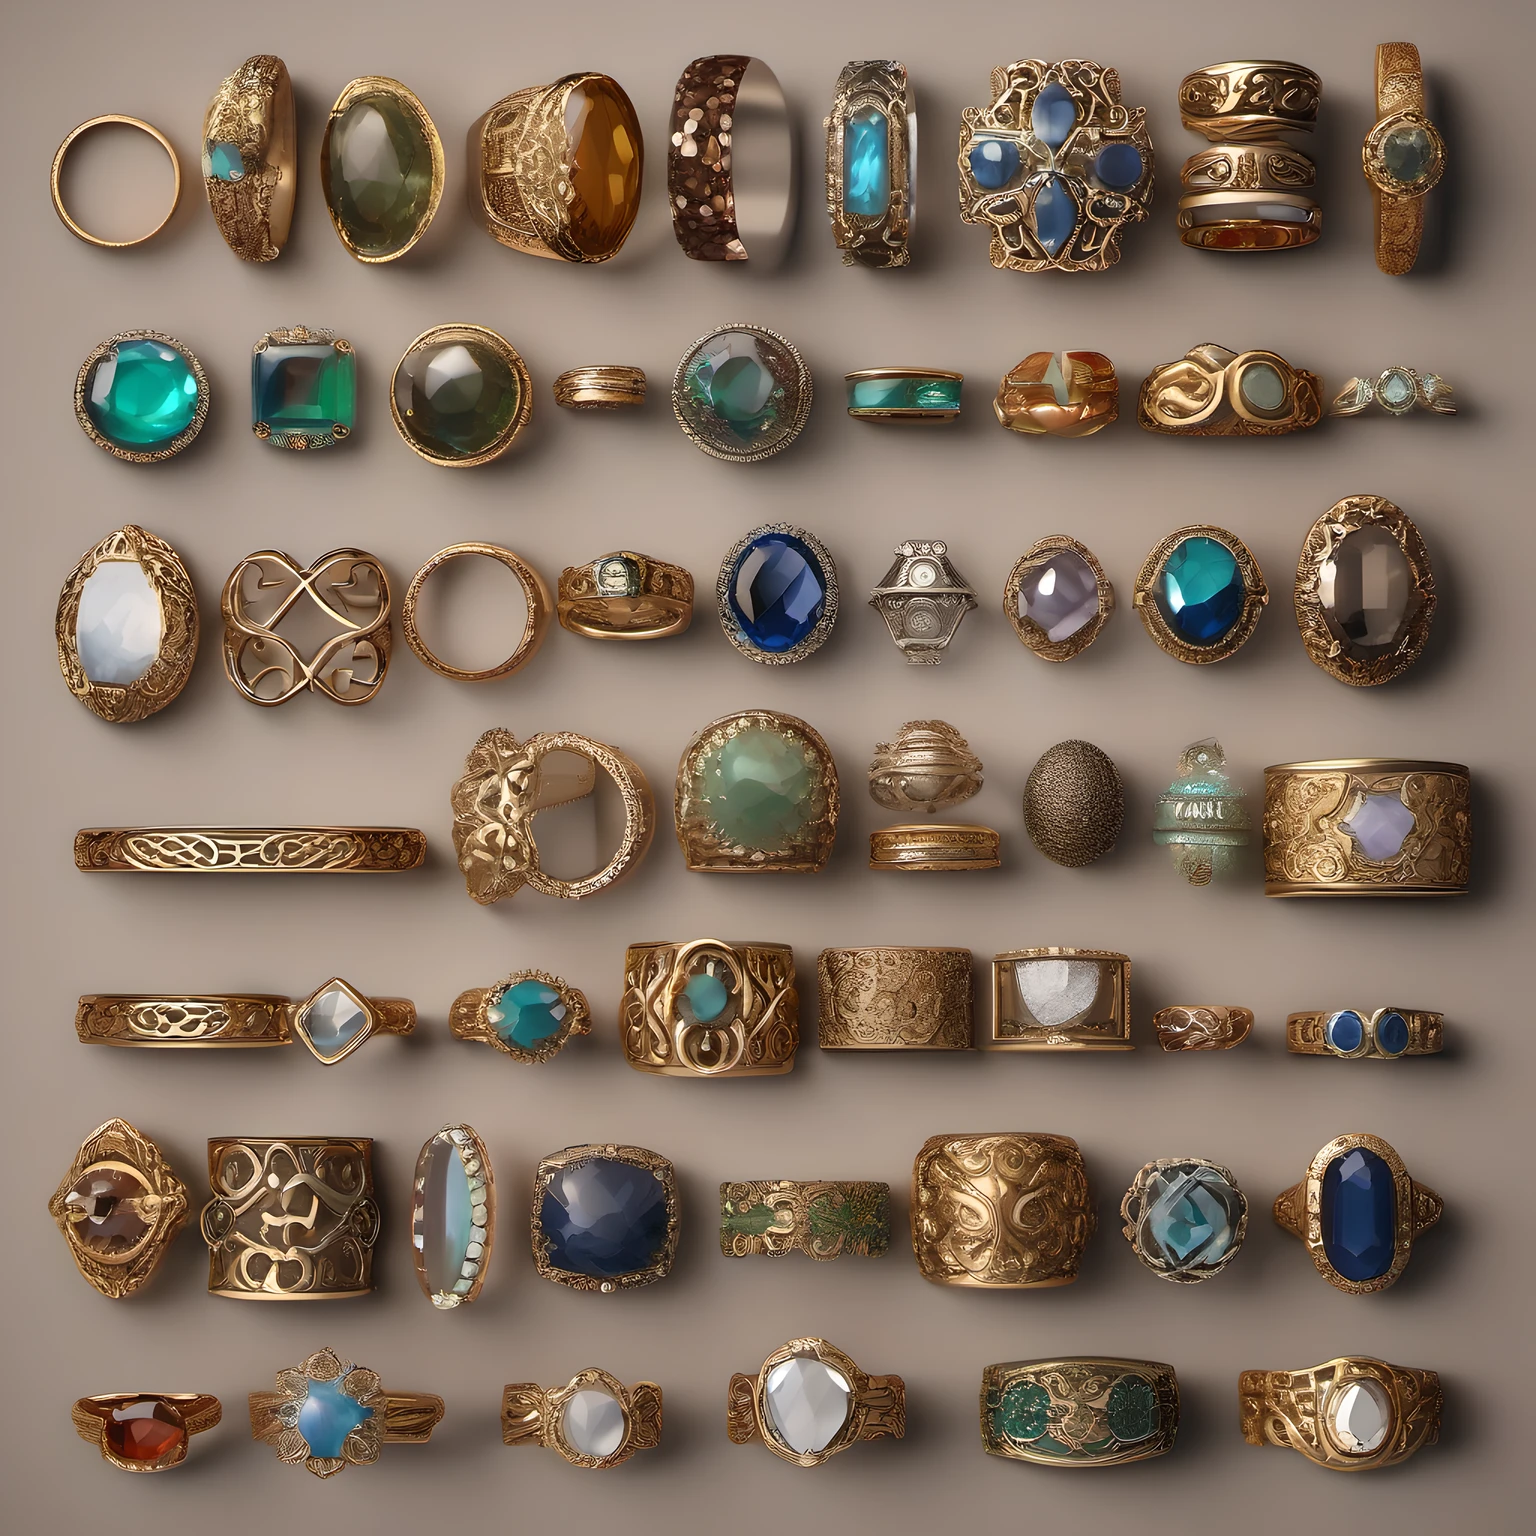 A collection of various rings with different shapes, sizes, colors, and materials. The rings are neatly arranged on a brown background in a knolling style, creating a contrast between the circular and rectangular shapes. The rings have intricate designs and some of them have gemstones or symbols on them. The image has a fantasy theme and a high resolution with ultra detailed textures and dynamic lighting., (realistic, 8k, masterpiece)